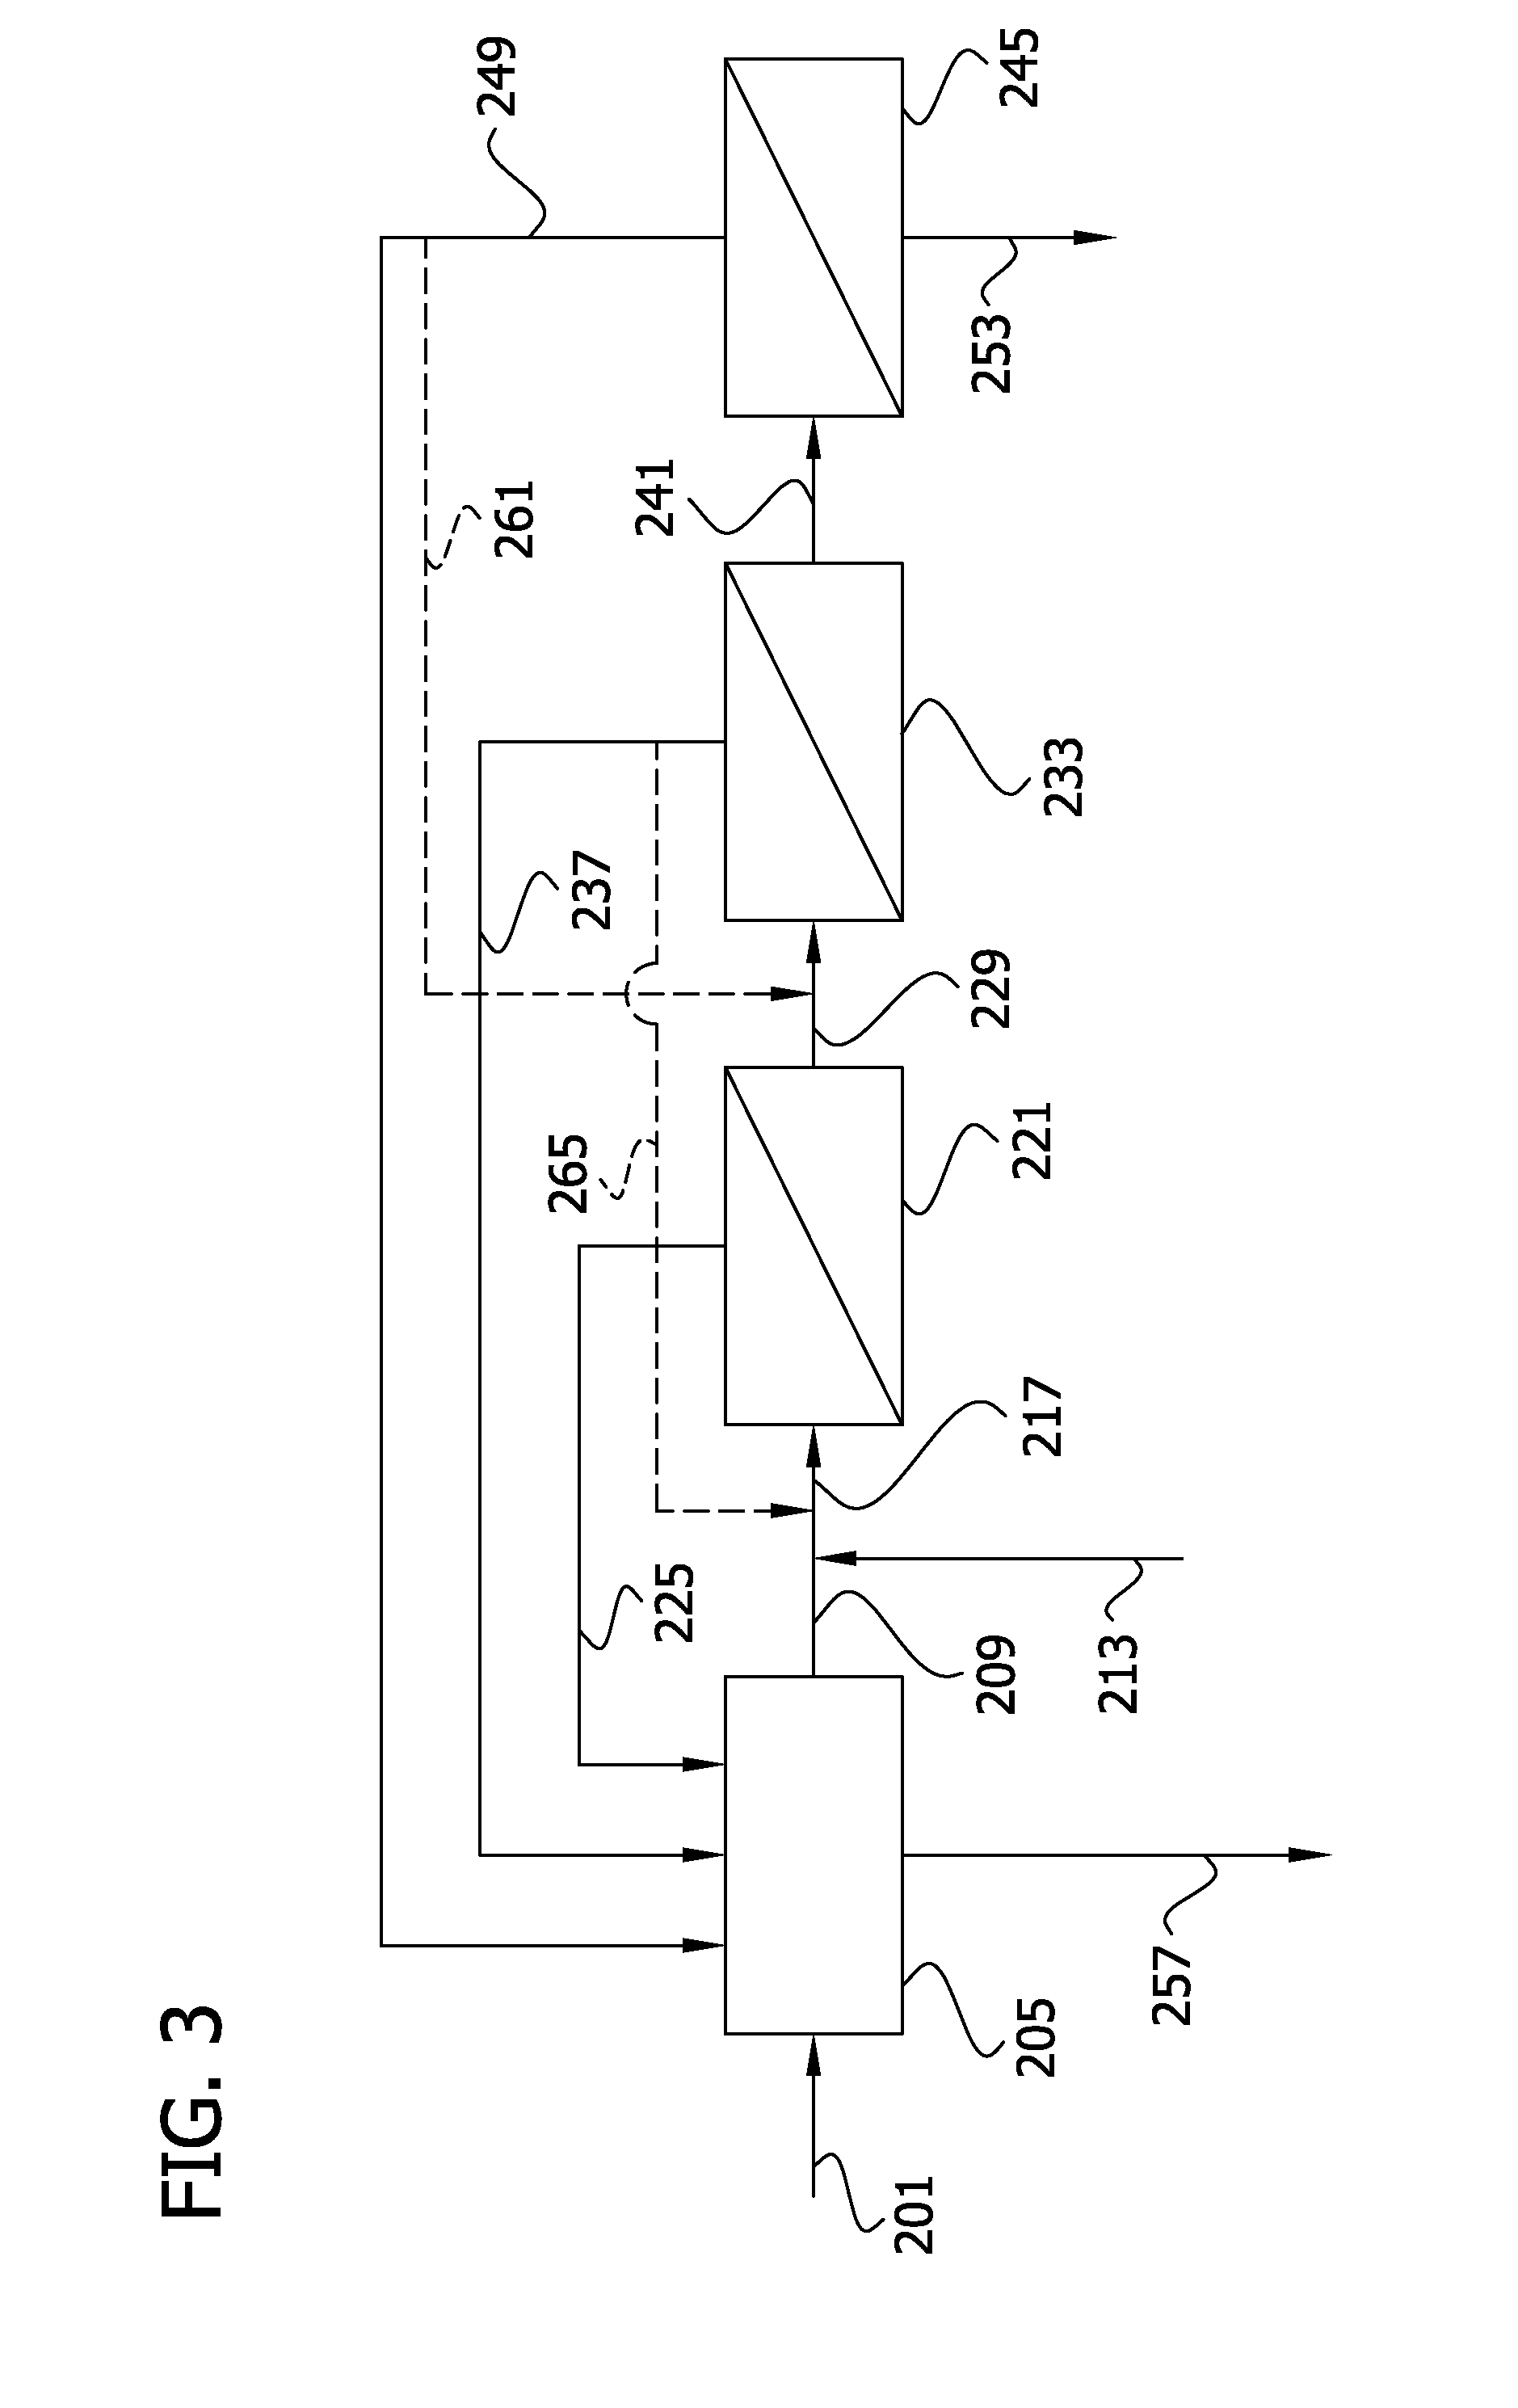 Processes for producing and recovering shikimic acid